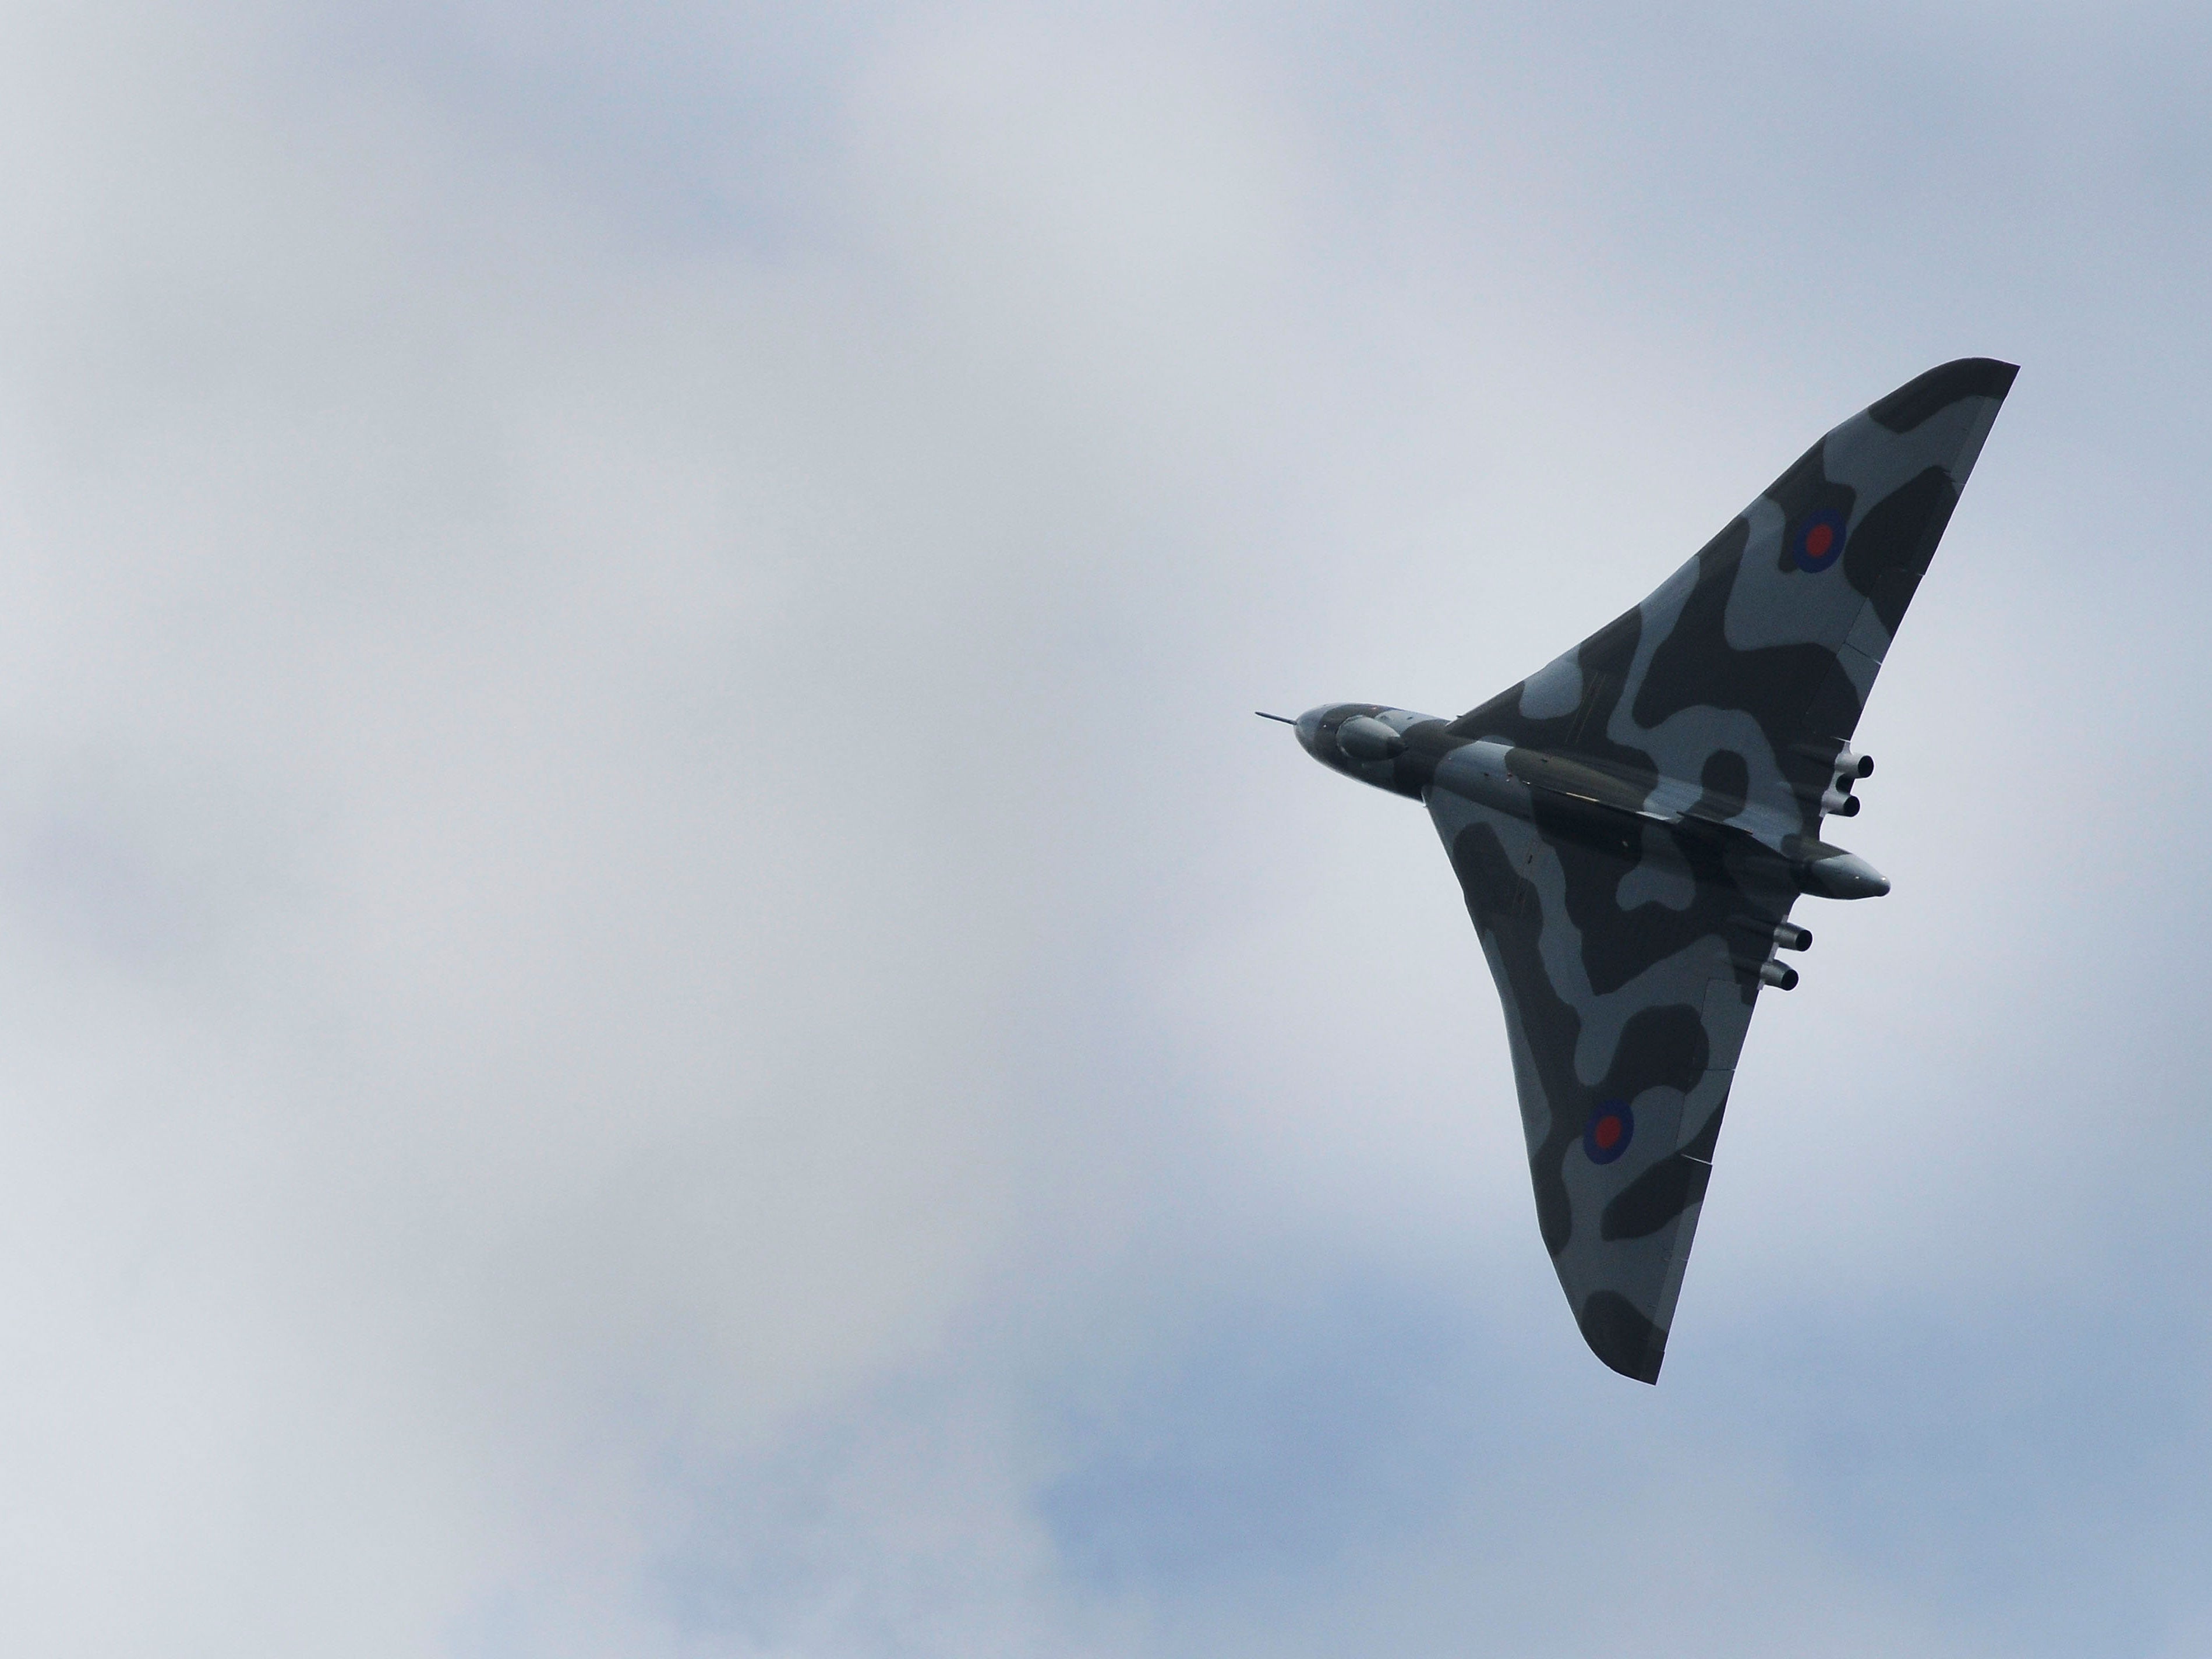 The last Avro Vulcan putting on an air display during the Goodwood Festival of Speed at Goodwood House